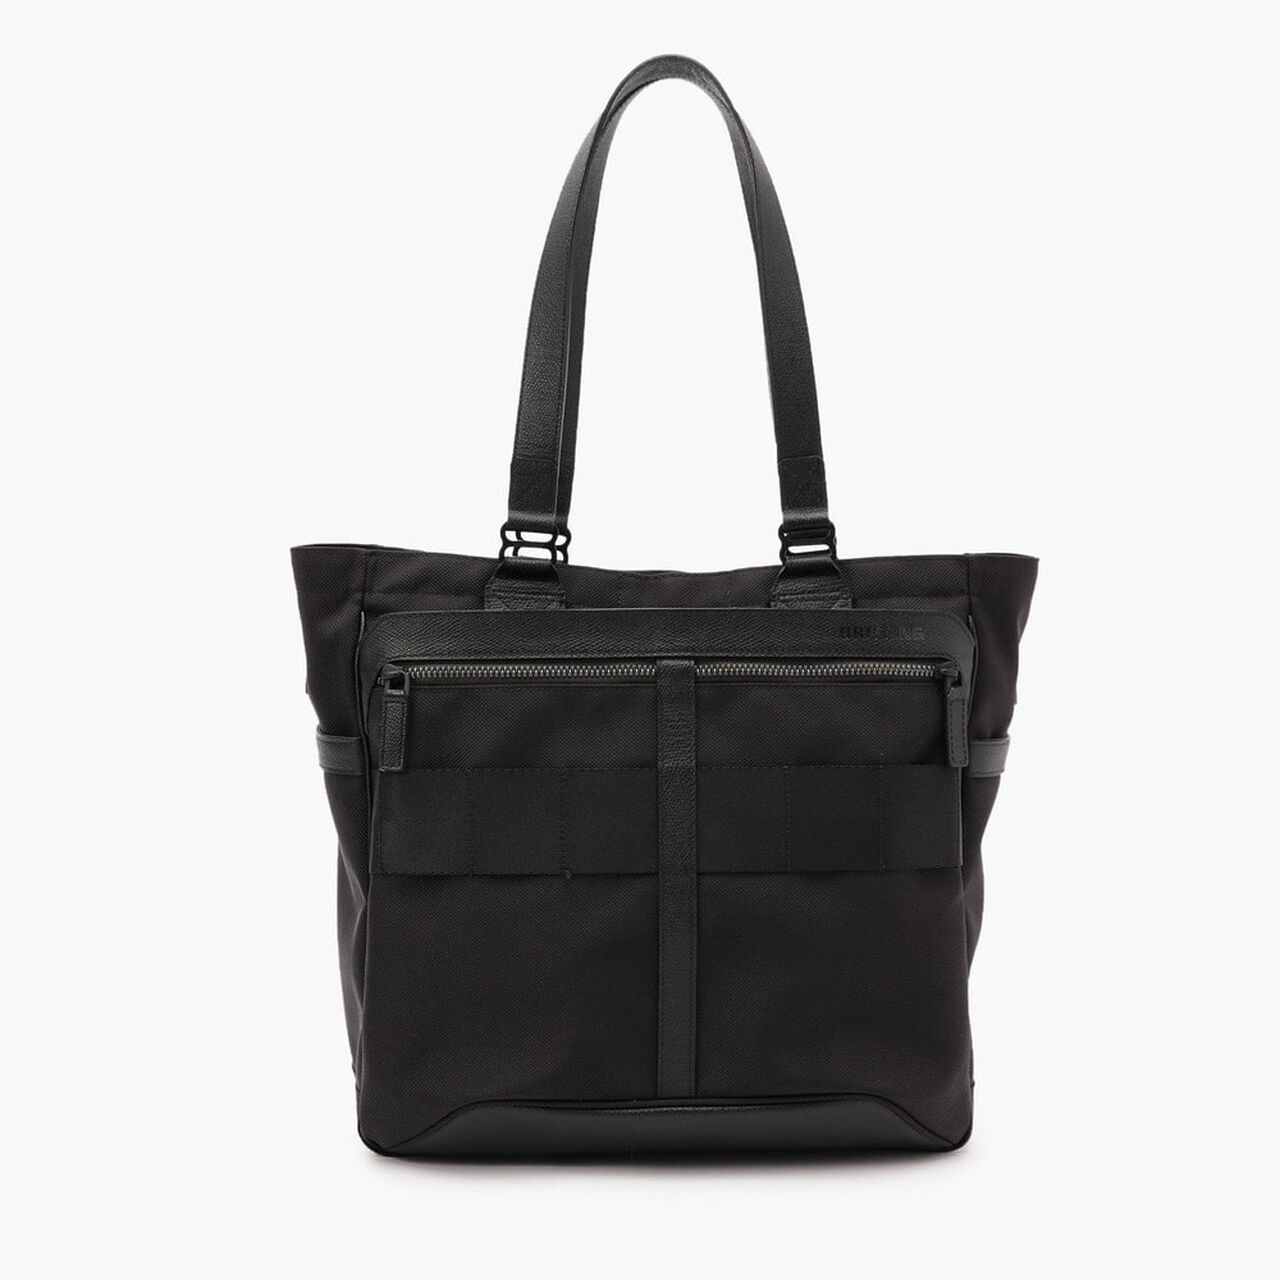 FUSION BS TOTE HD,Black, large image number 0